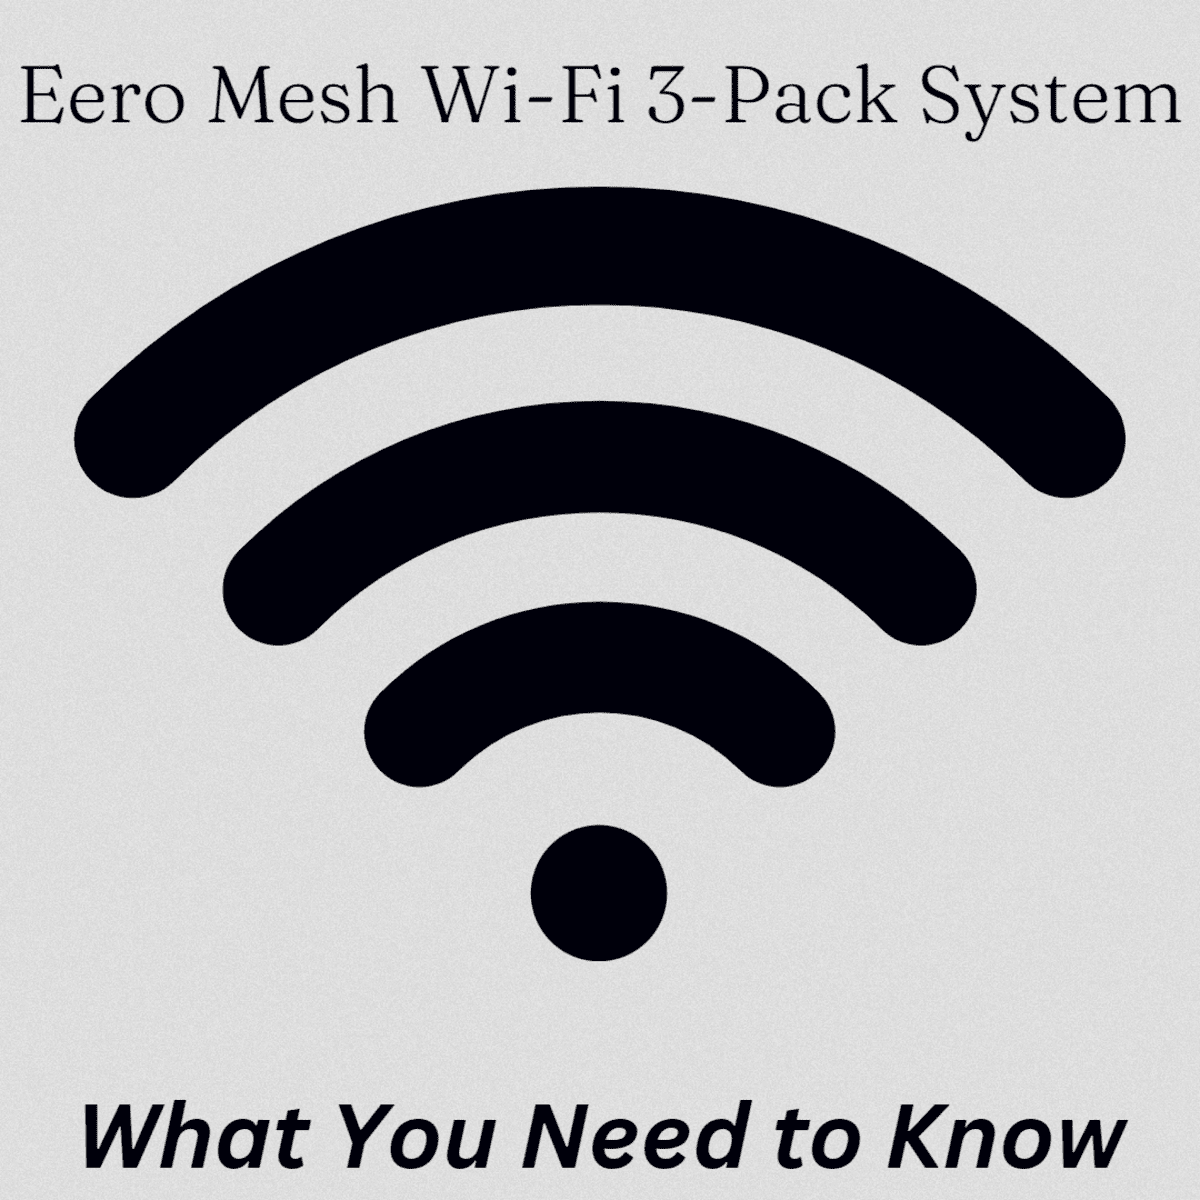 The Eero Mesh Wi-Fi 3-Pack System: What You Need to Know - TurboFuture